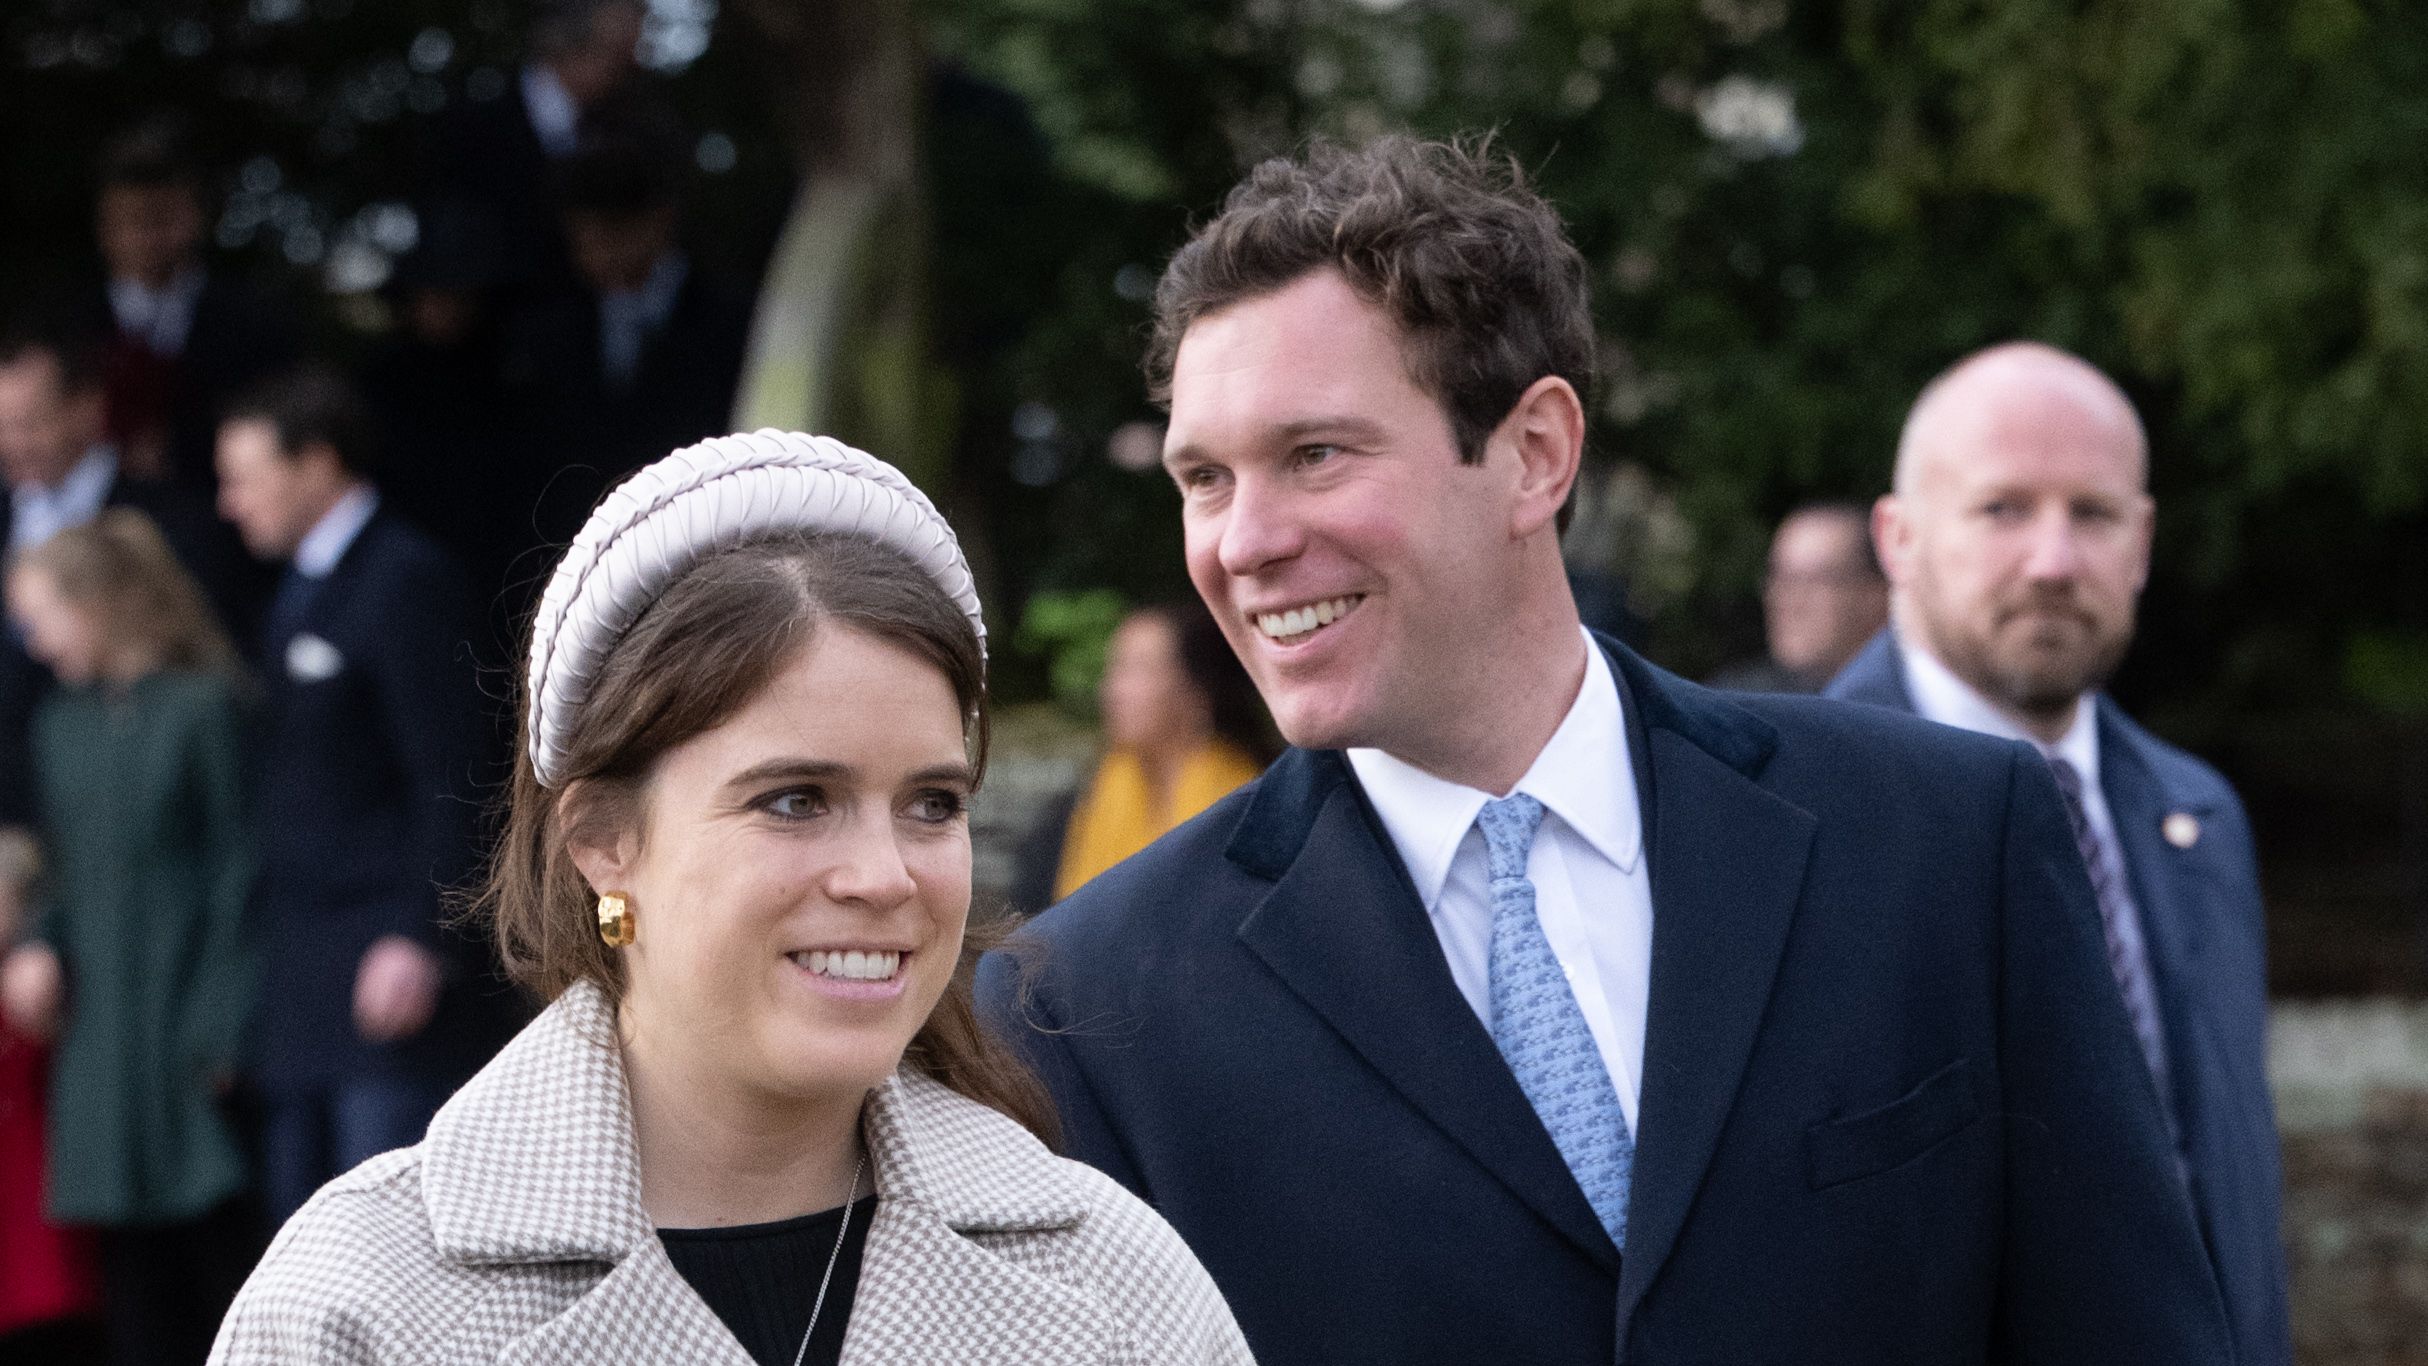 Jack Line X Video - Who Is Princess Eugenie, Queen Elizabeth's Granddaughter? - 7 Facts About  Princess Eugenie of York